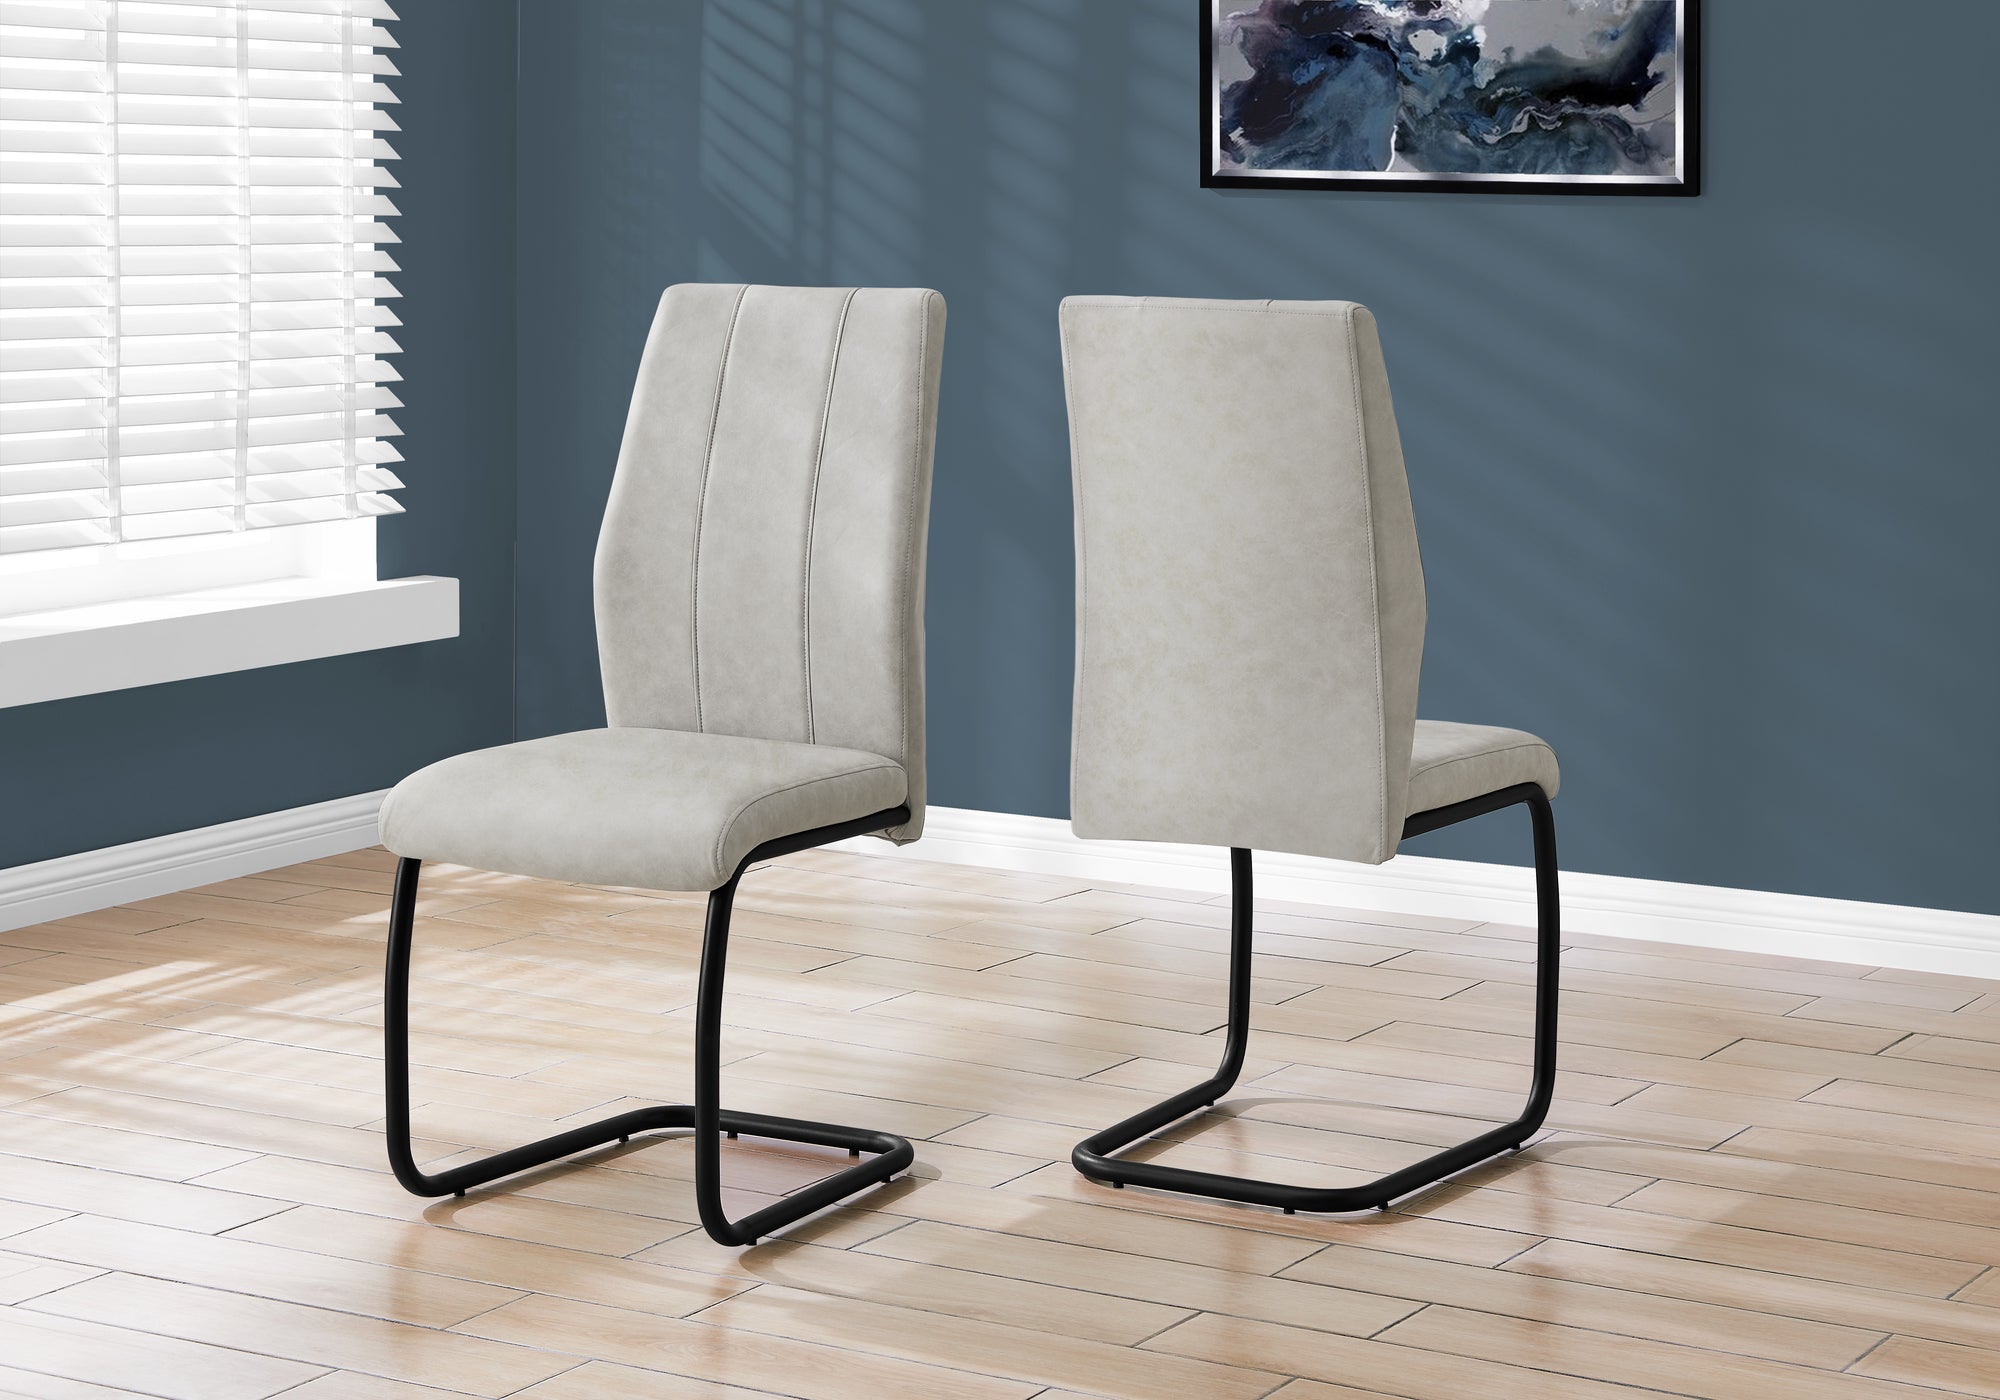 I 1113 - DINING CHAIR - 2PCS / 39"H / GREY FABRIC / BLACK METAL BY MONARCH SPECIALTIES INC